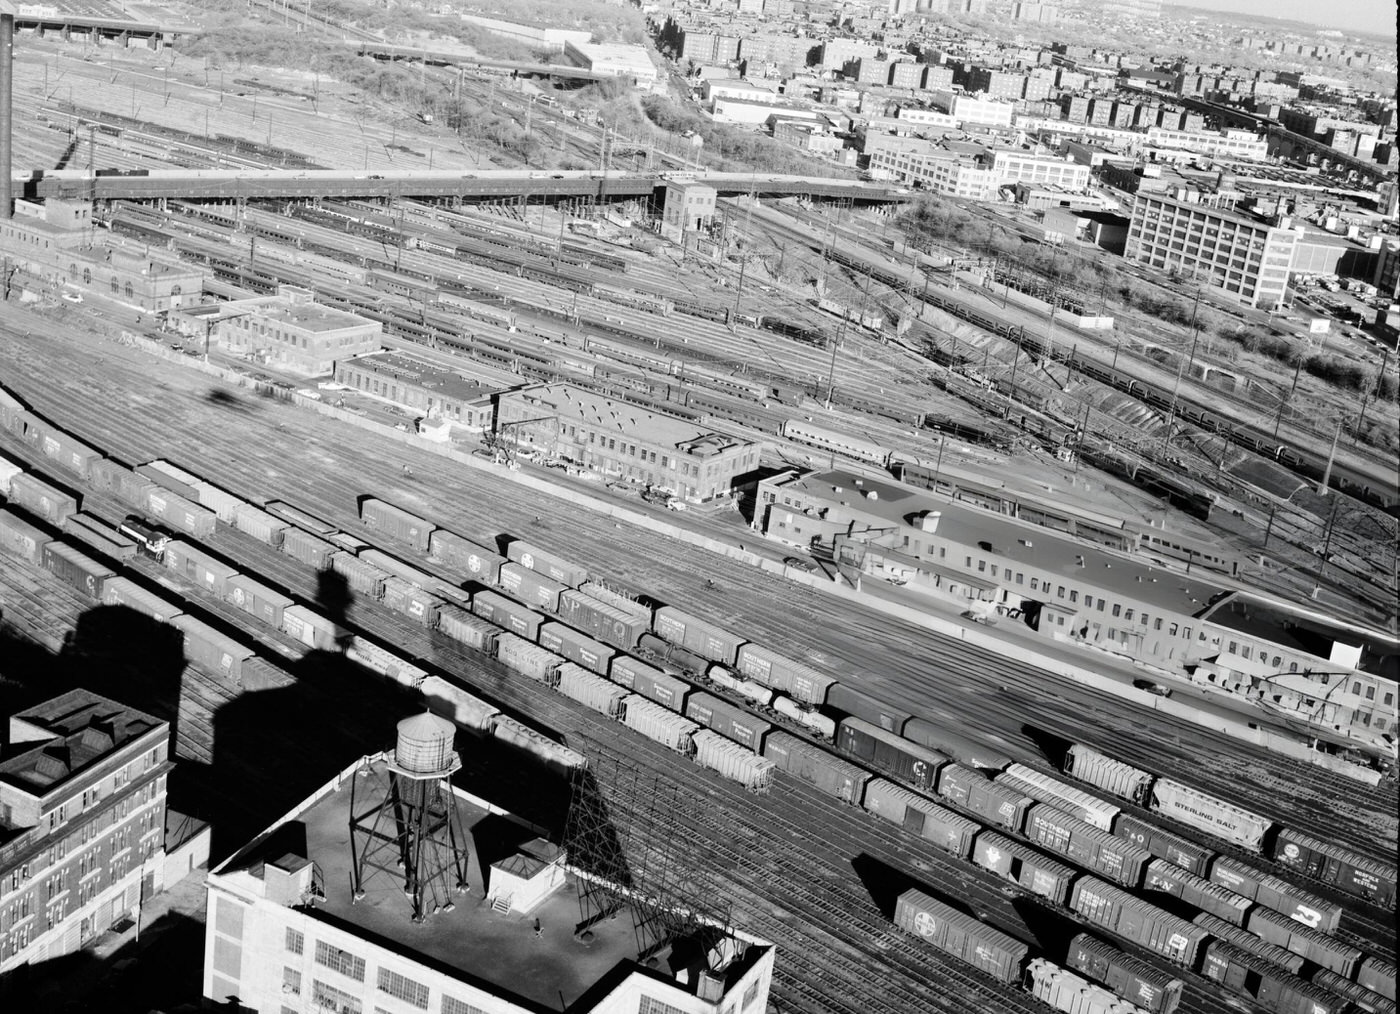 Container Freight Cars Sit On The Railroad Tracks In The Sunnyside Yards In Long Island City, Queens, 1970S.